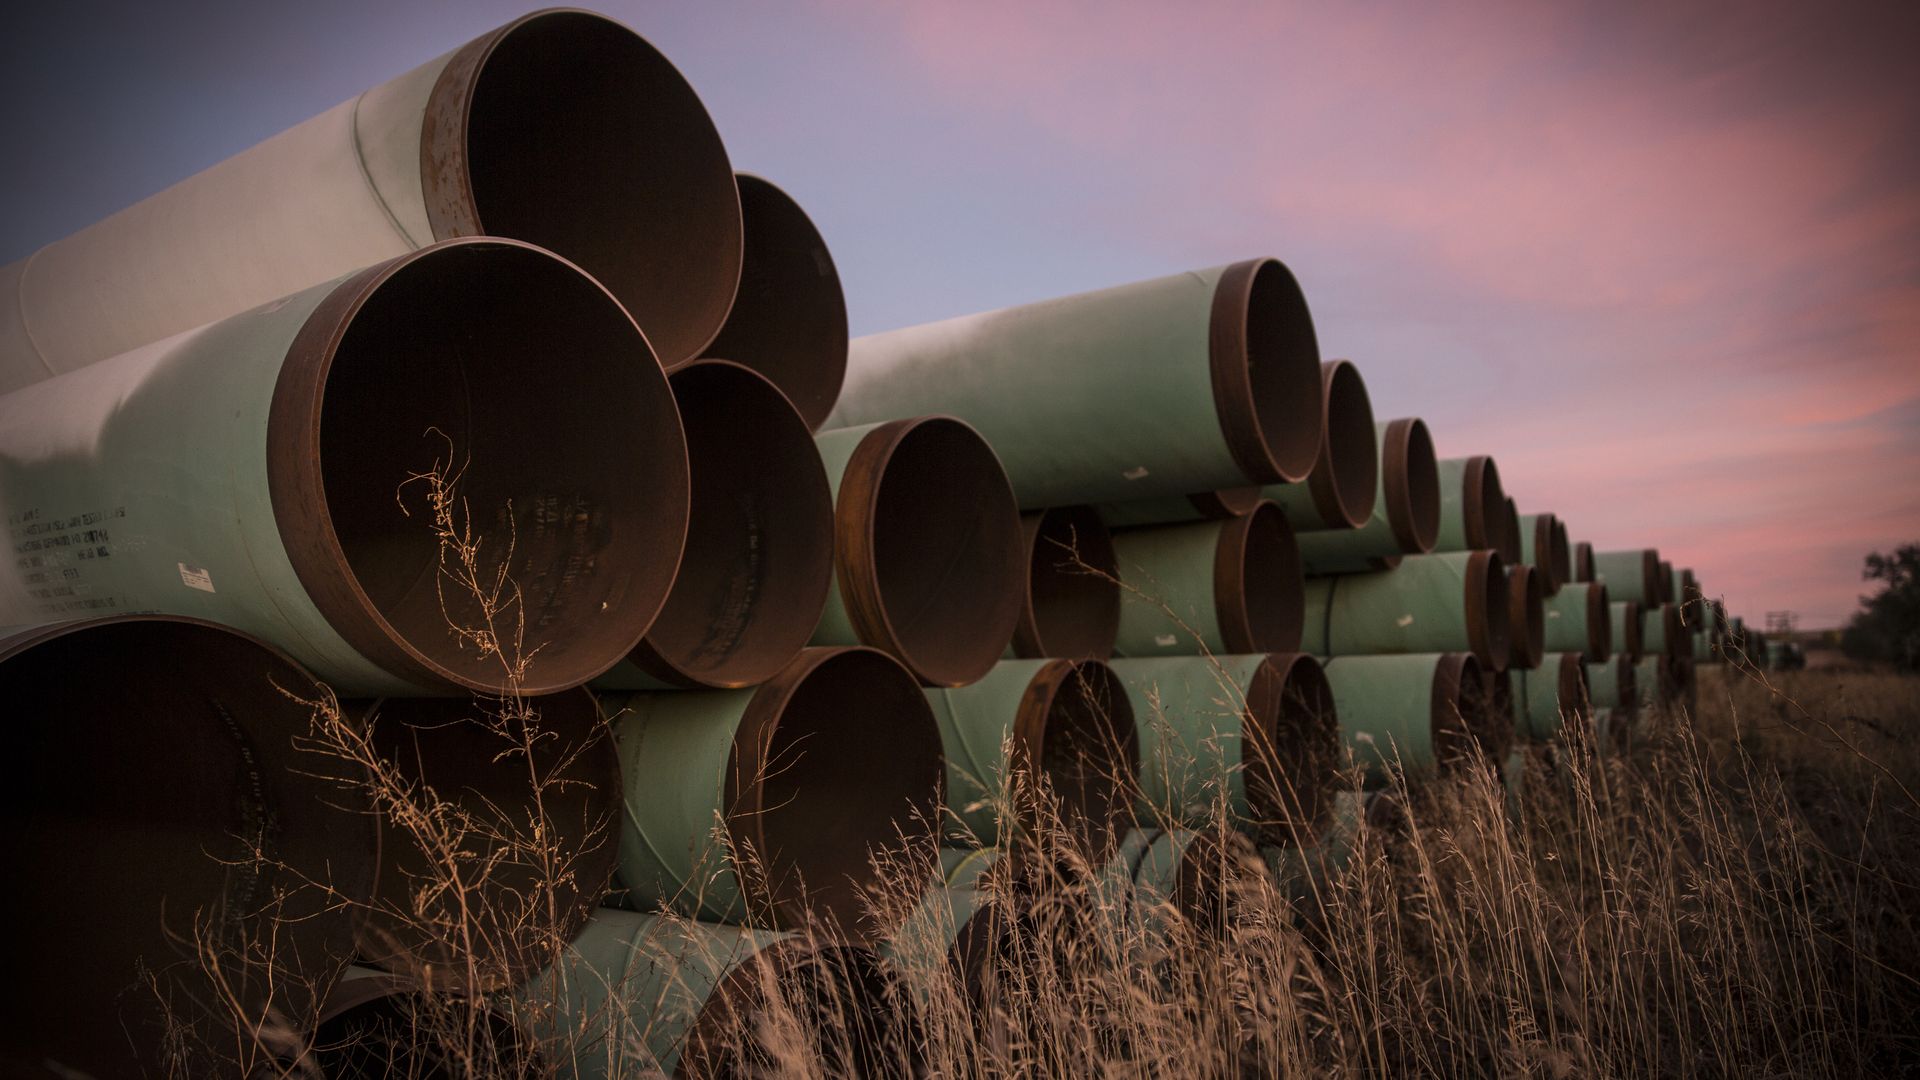 Pipelines stacked on one another.